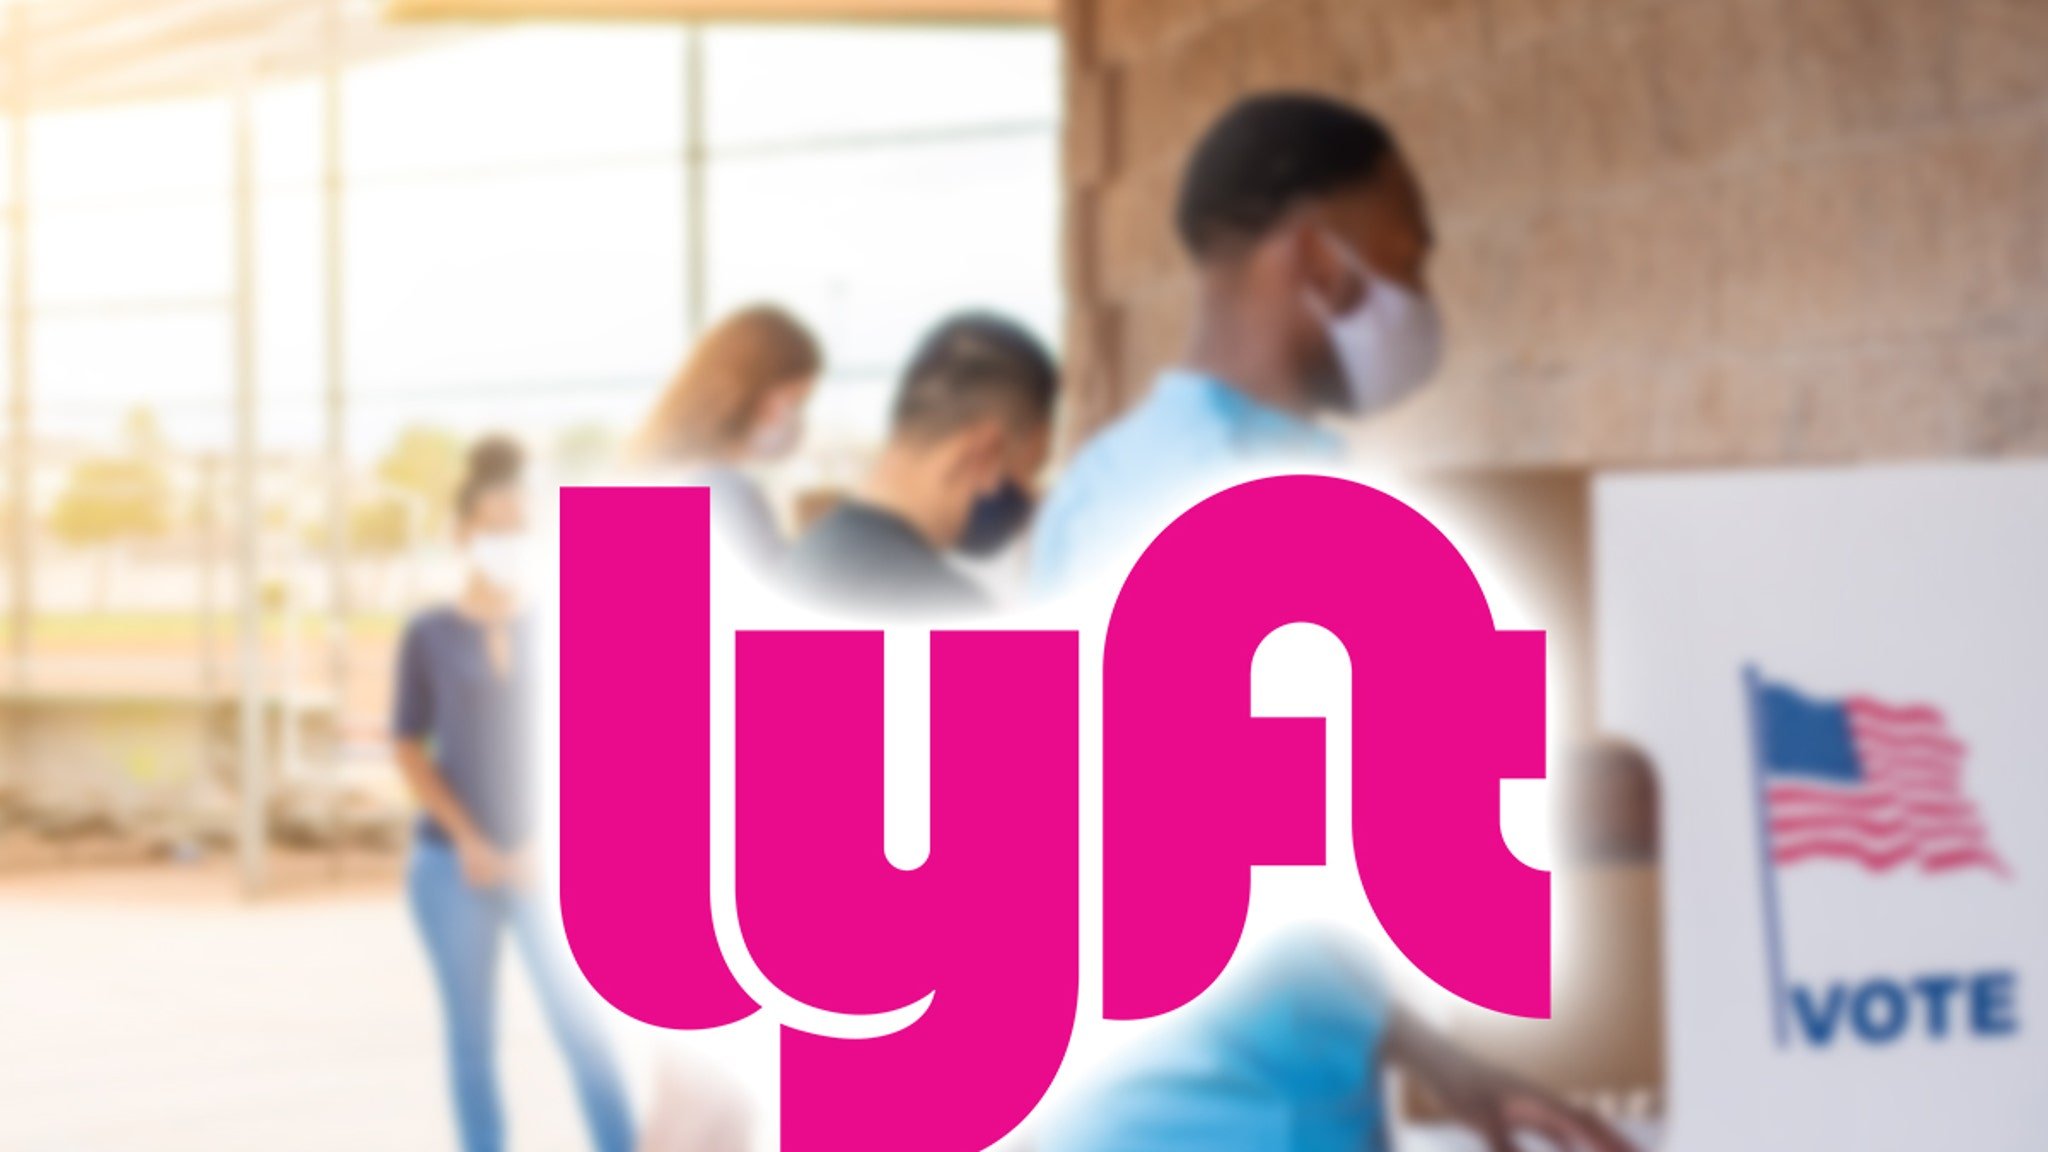 Lyft Offering Big Discounts to Voters ... In Some Cases Free Rides